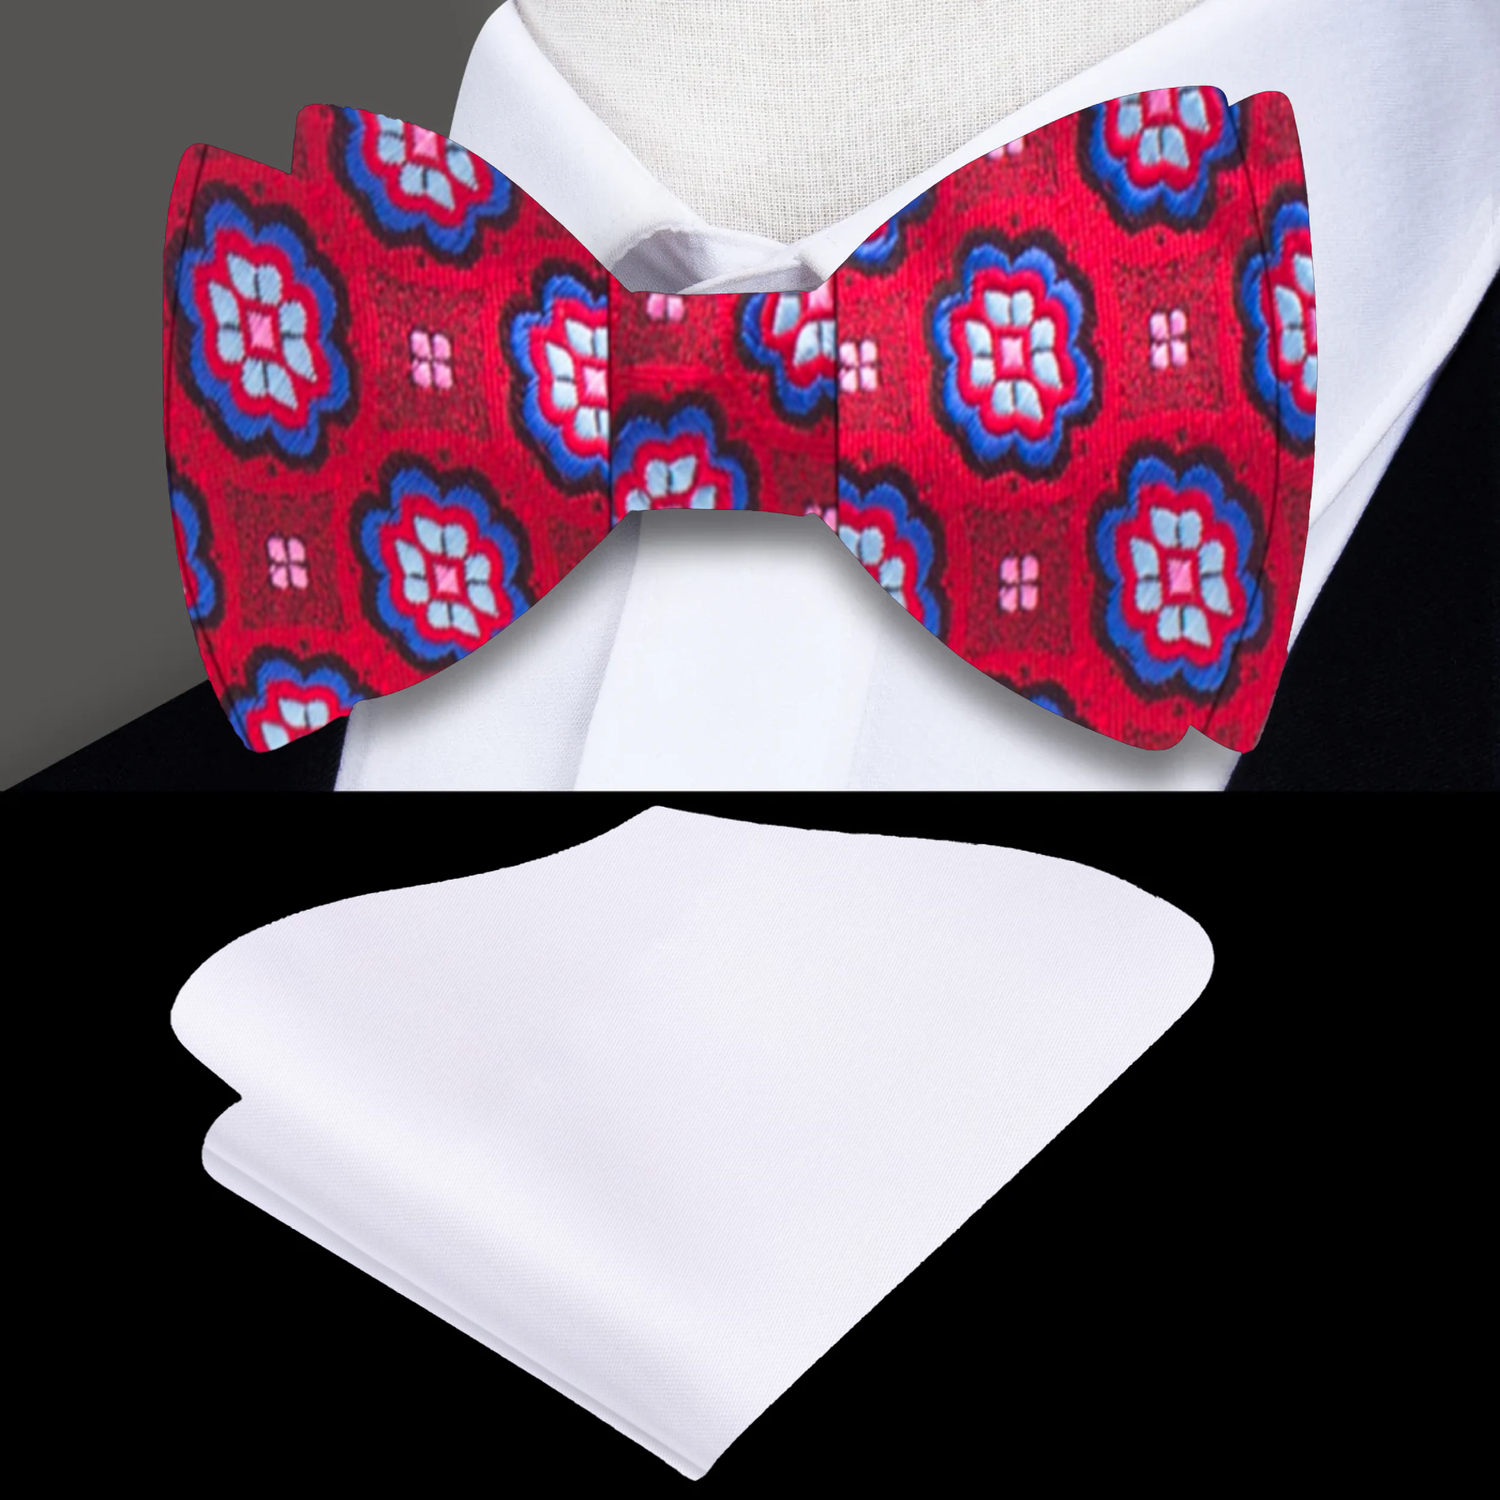 Main: Red Blue Raspberry Floral Bow Tie and White Pocket Square